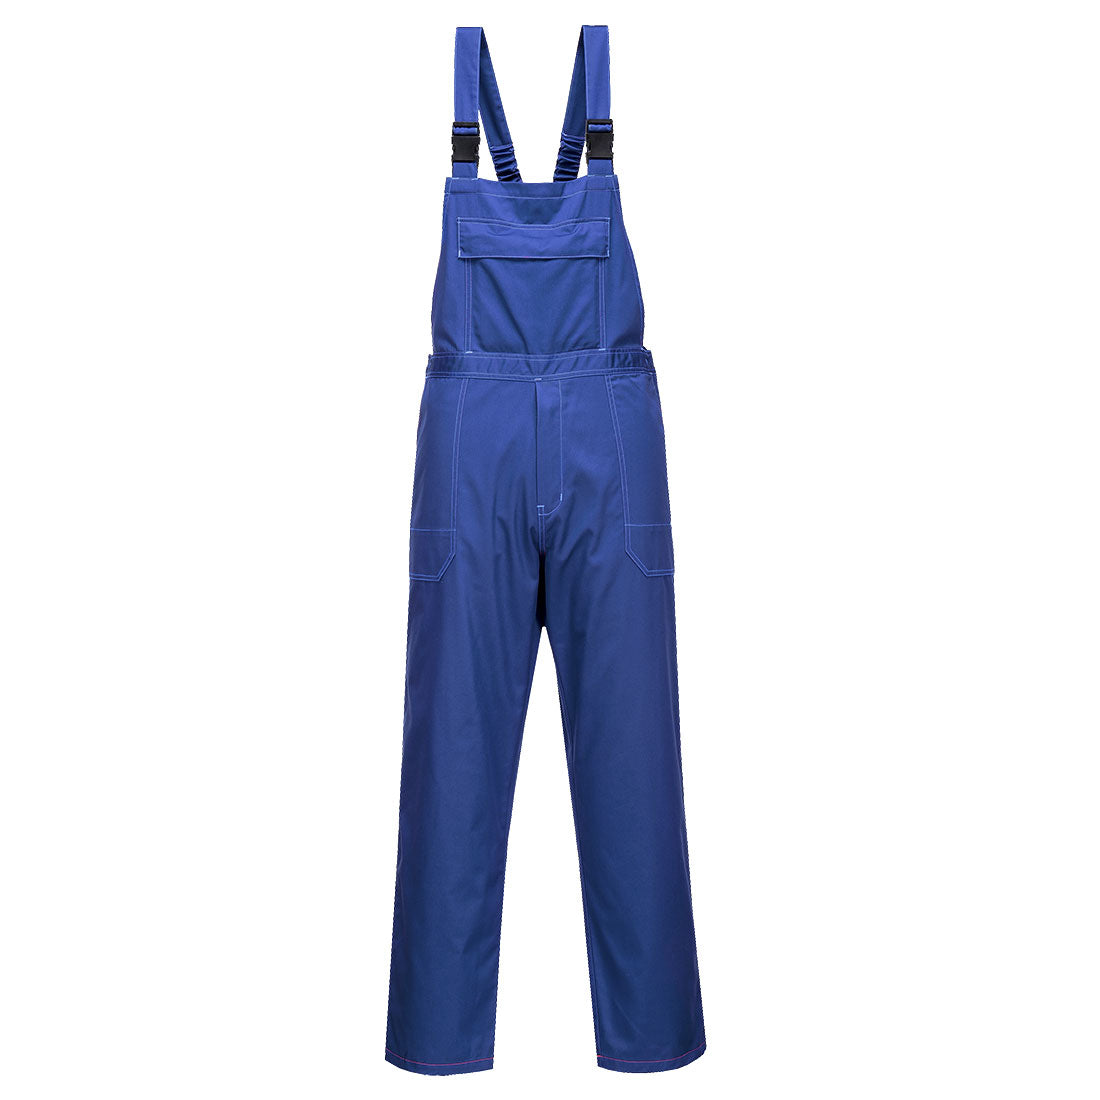 Portwest CR12 Chemical Resistant Bib for Chemical Resistant Workwear